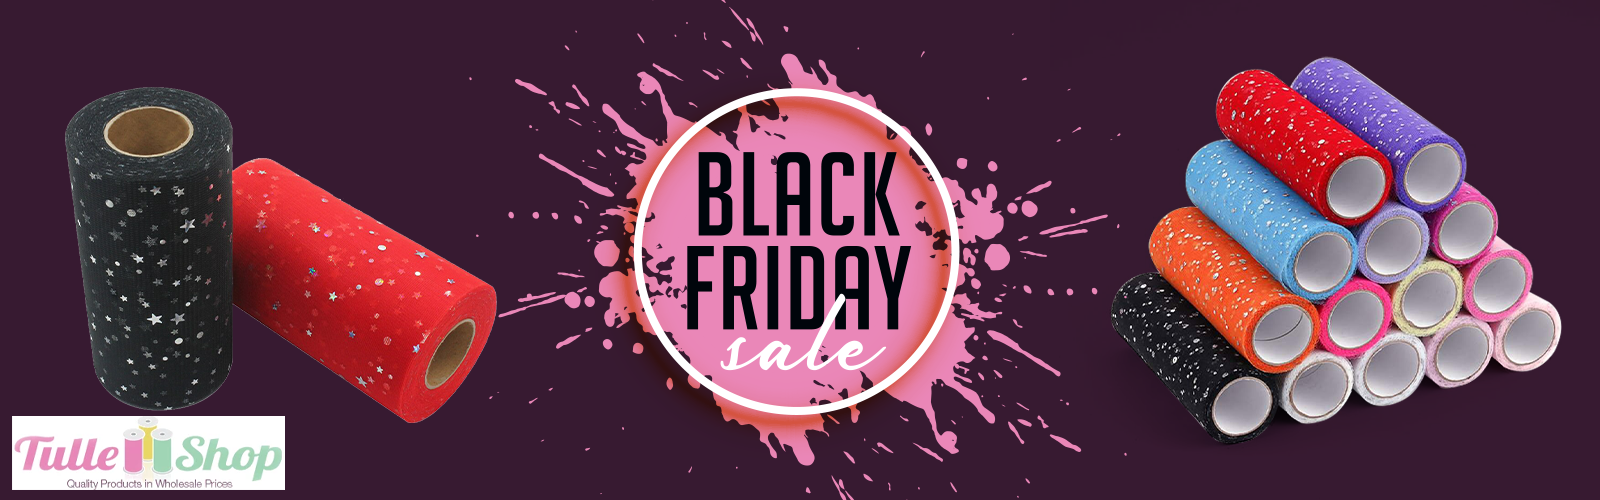 Black Friday Sale on Tulle Shop:10% to 50 % Off on New Arrivals! Limited Time Offer!